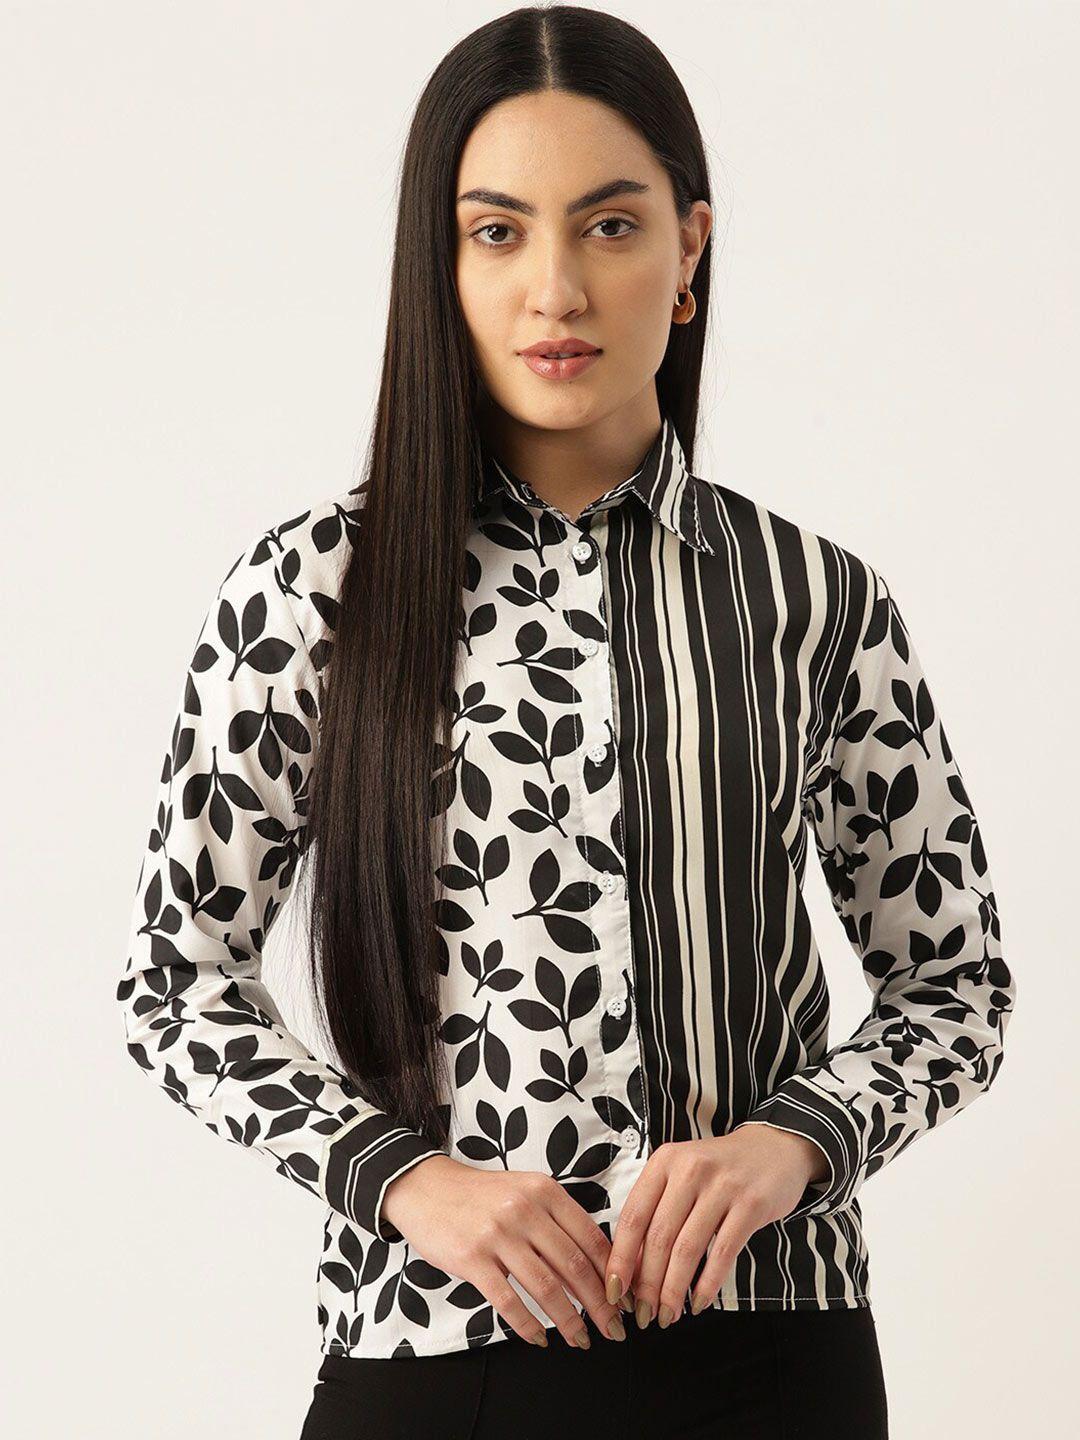 baesd-floral-printed-shirt-style-top